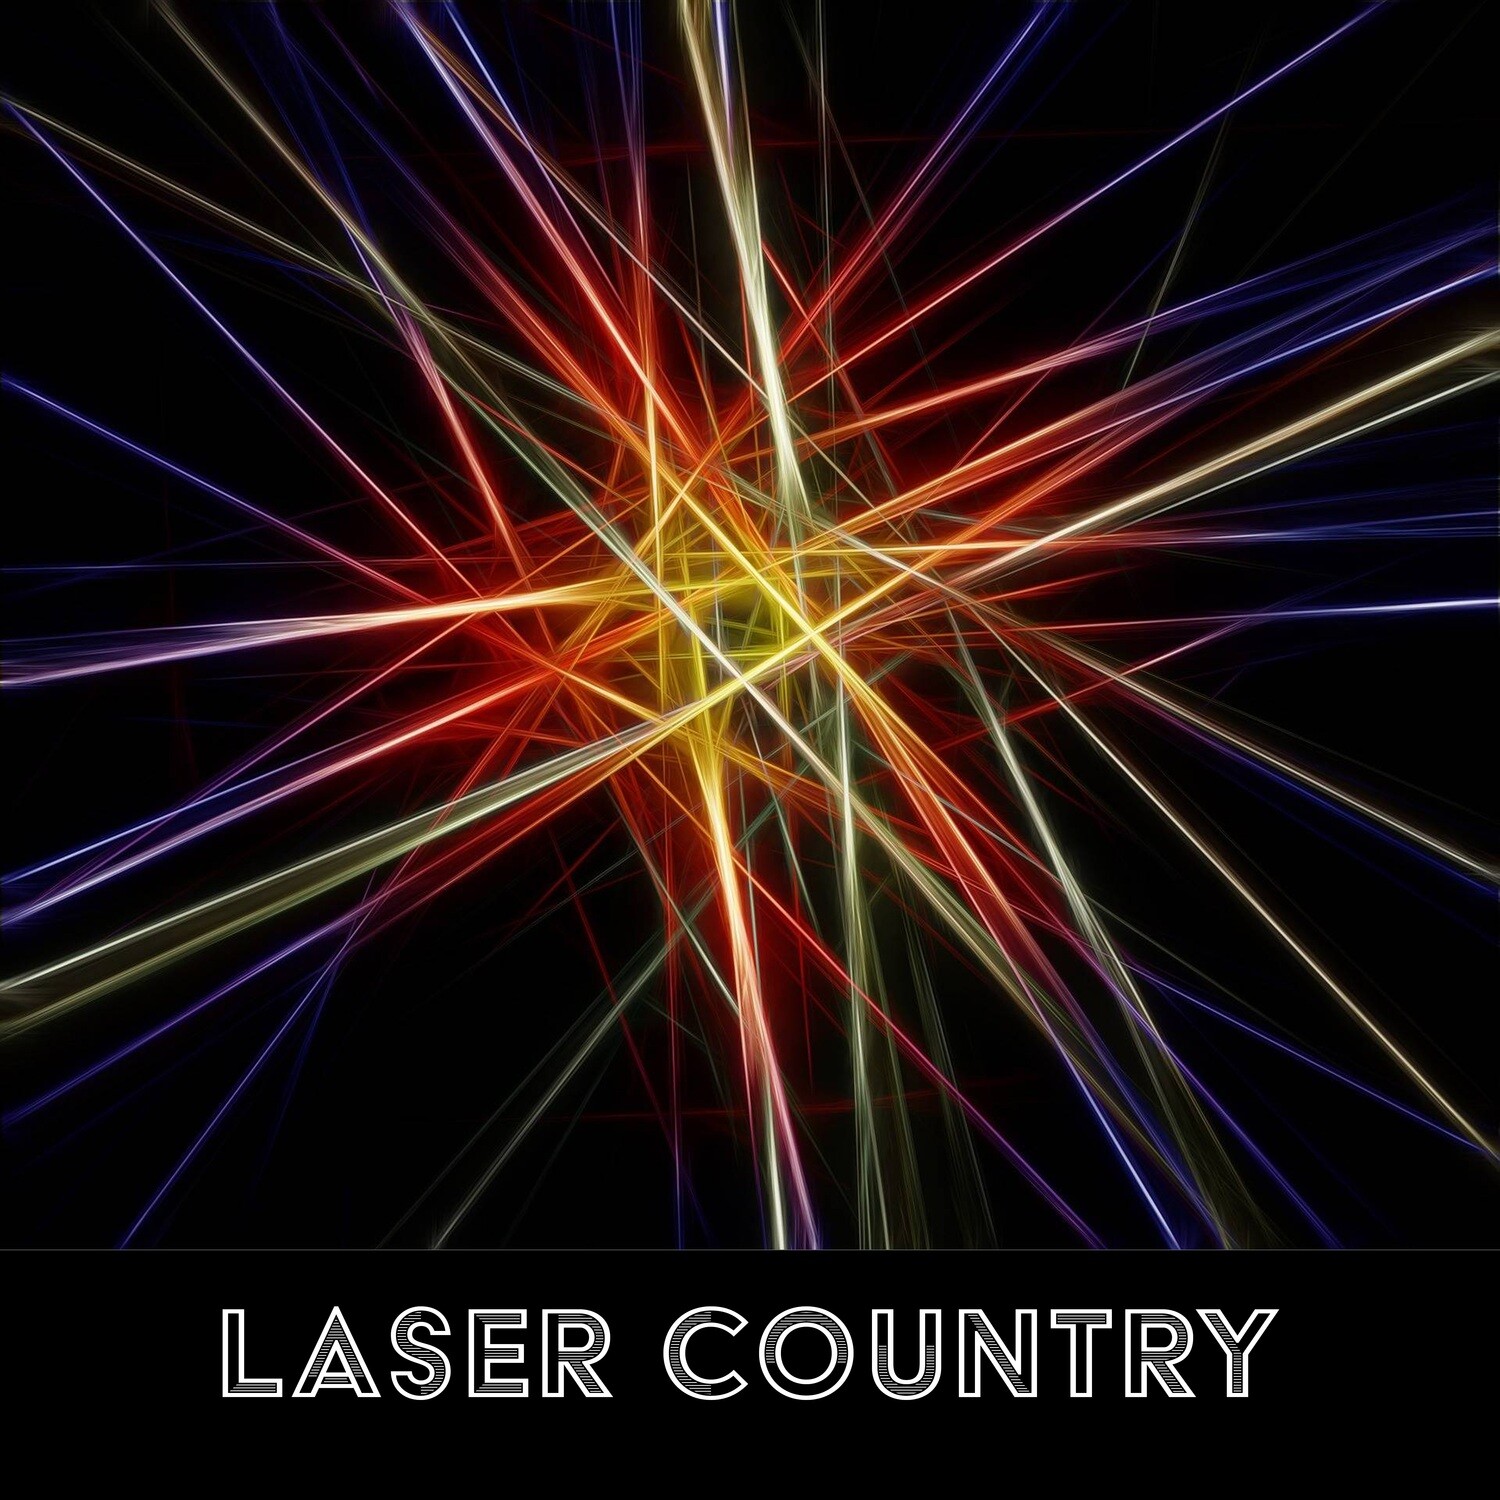 LASER COUNTRY
Sunday, July 7, 1pm, Ticket Type: Laser Ticket $15